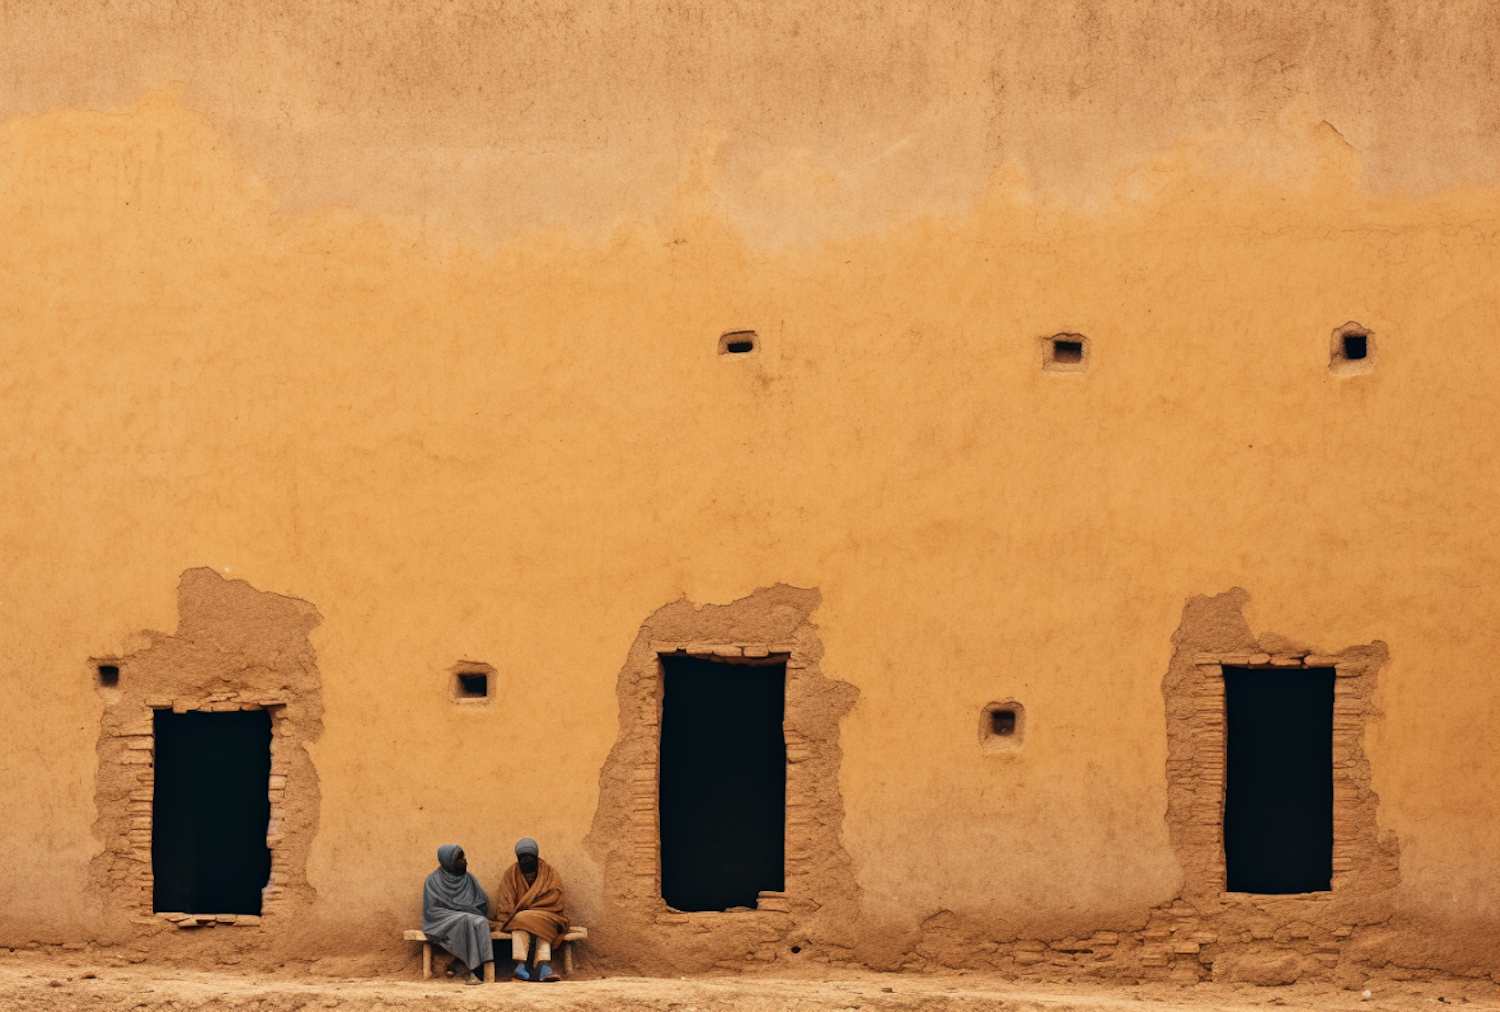 Timeless Tranquility: Companions Beside the Ochre Wall